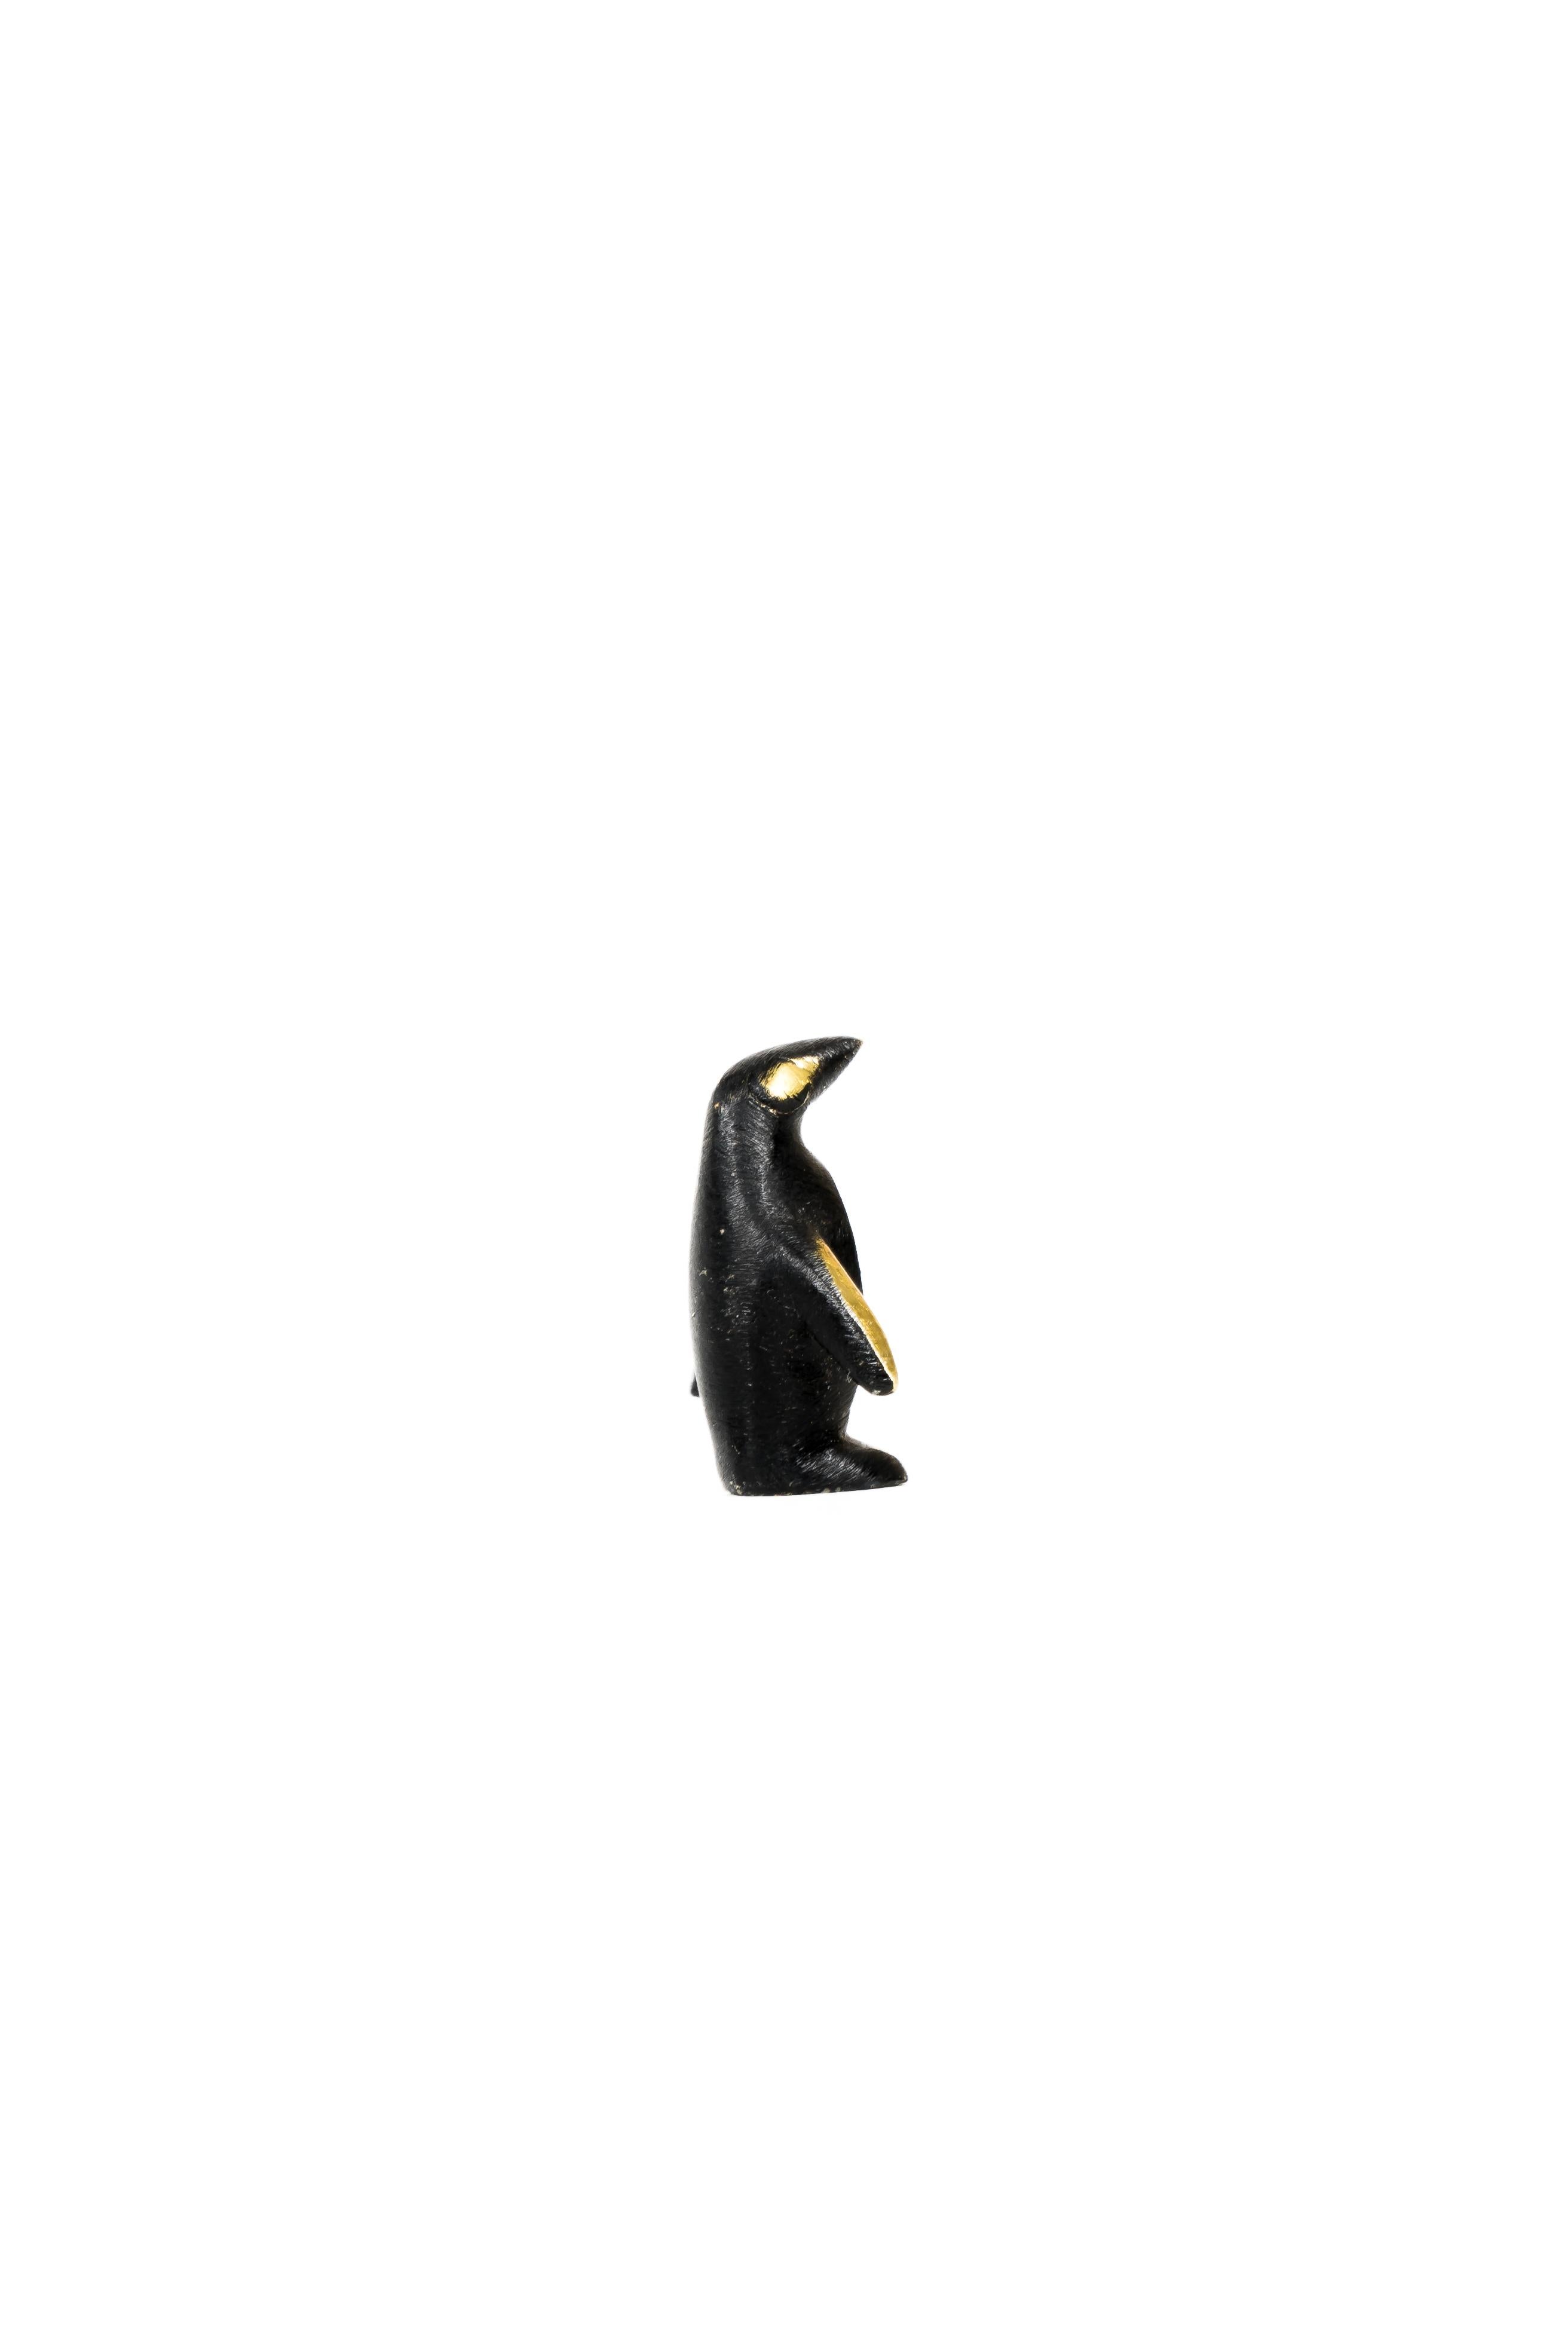 Blackened Small Penguin by Walter Bosse, Around 1950s For Sale